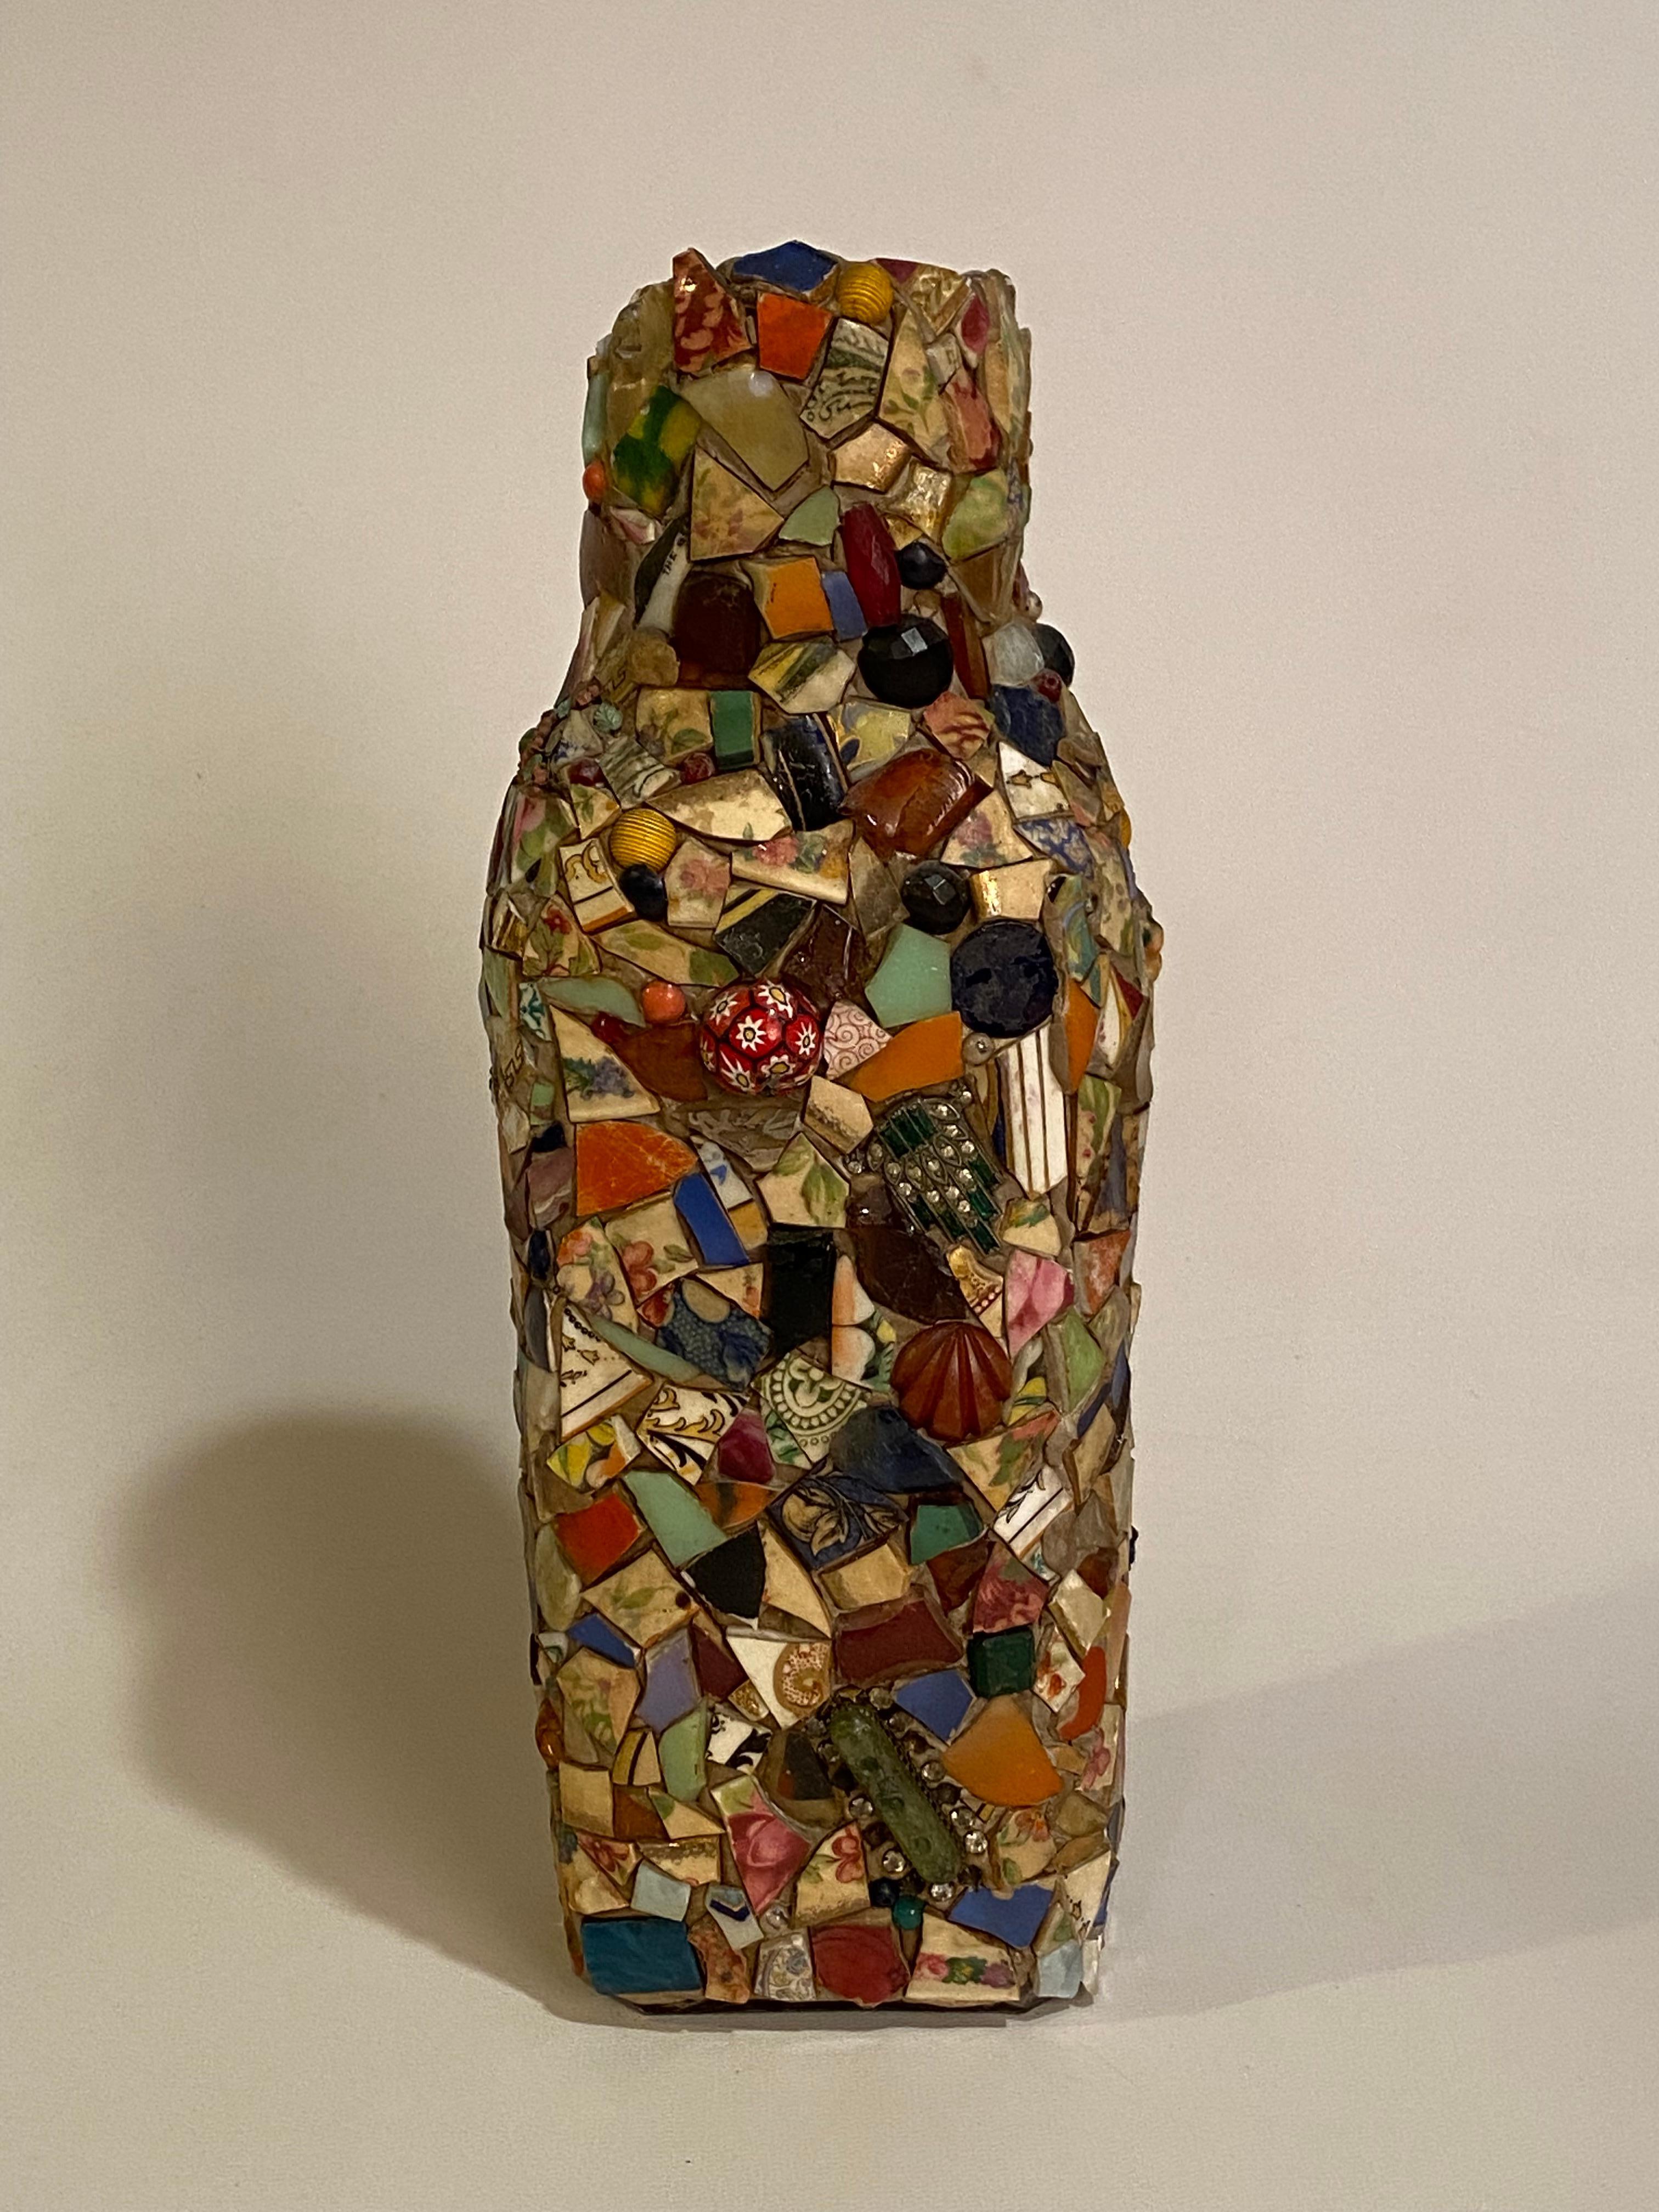 A beautiful and complex folk art mosaic bottle. Clear glass milk bottle that is covered in countless fragments, broken porcelain, jewelry, Bakelite, glass, beads, pottery, clay... A wonderfully complex menagerie of vibrant color and texture. A